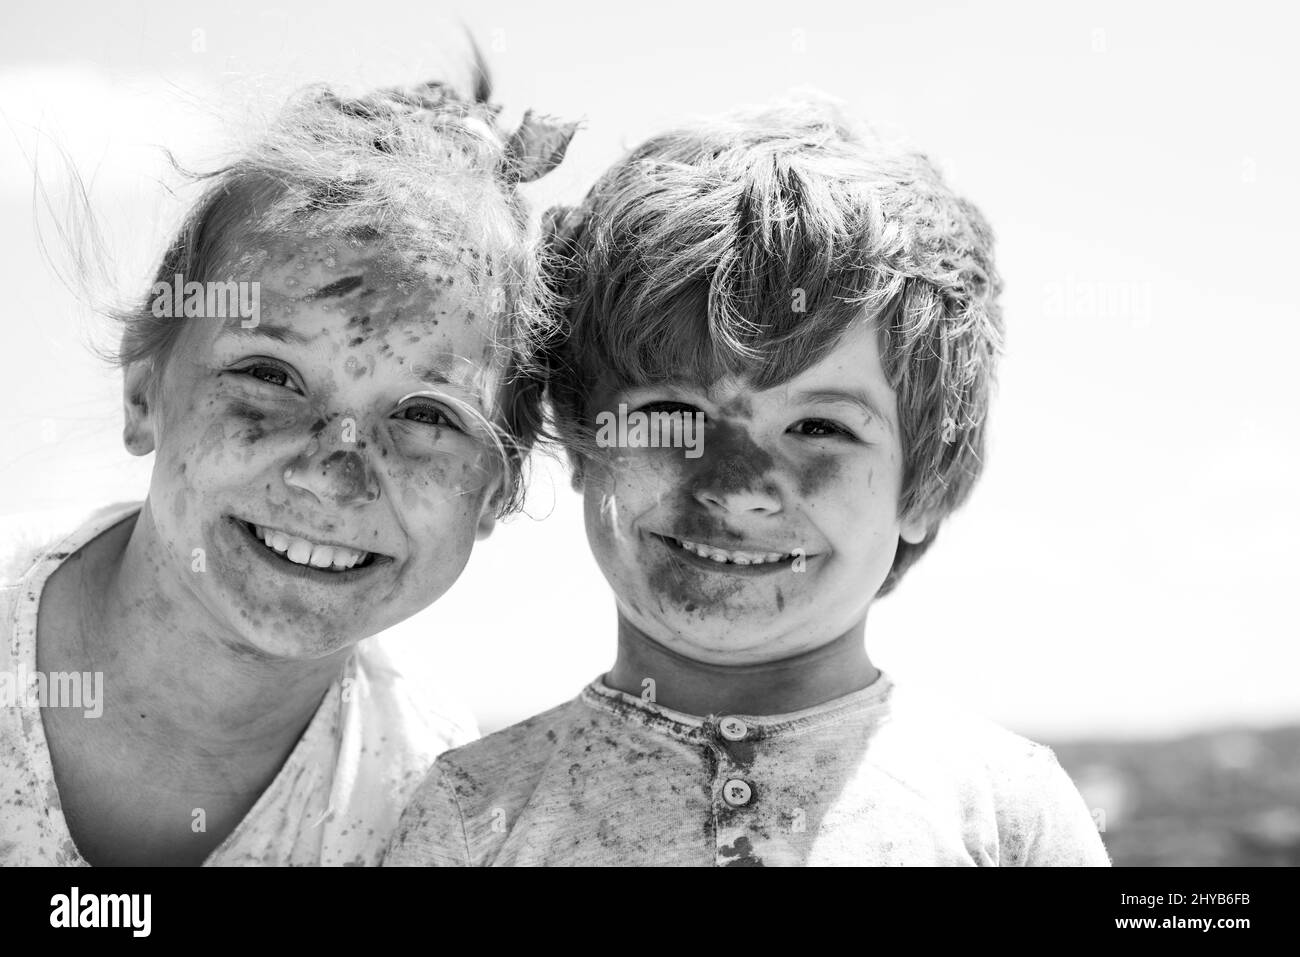 Smiling little kids portrait. Painted faces of funny kids. Children holi festival of colors. Little boy and girl plays with colors. Stock Photo